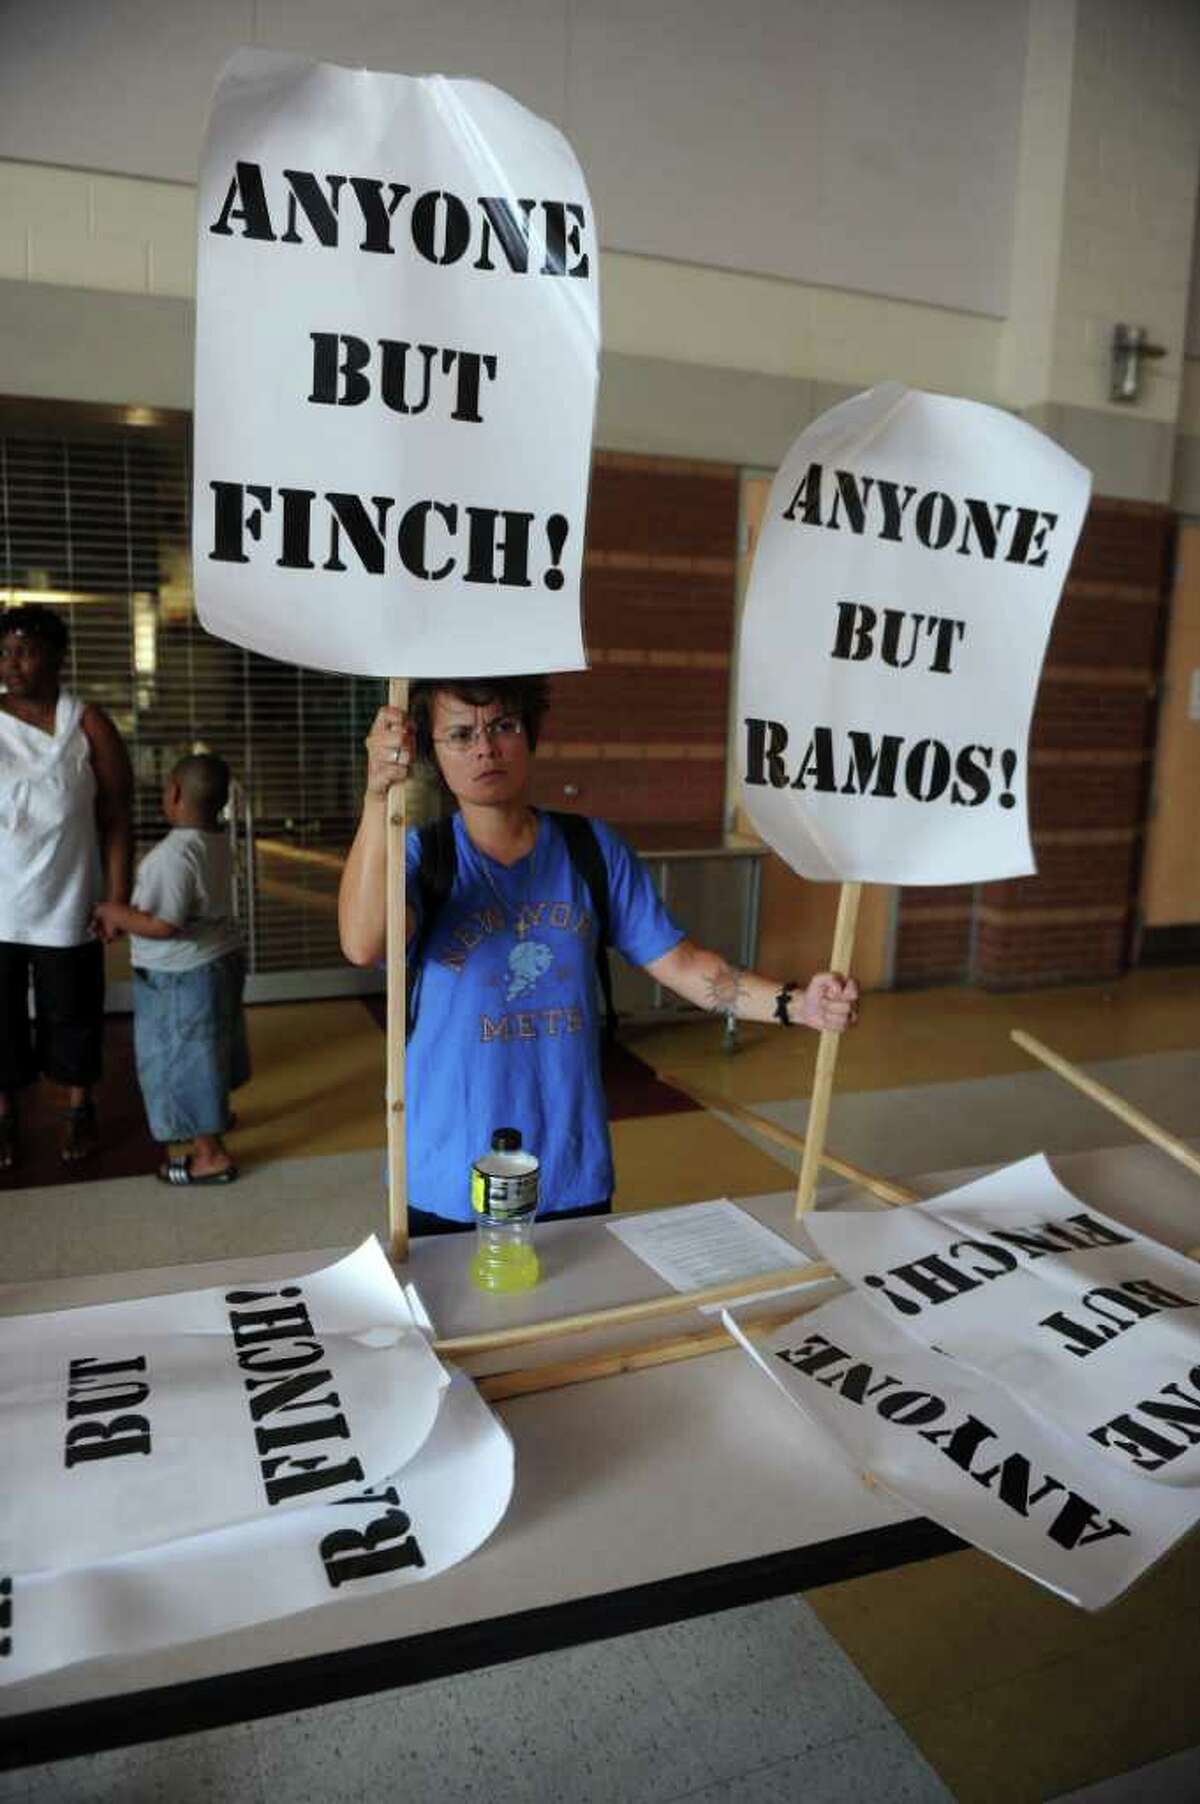 Cat Vendryes-Martin hold up signs protesting the Mayor Bill Finch and Superintendant of School Dr. John Ramos during a special meeting of the Bridgeport Board of Education was held at Cesar A. Batalla Elementary School in Bridgeport, Conn. on Tuesday July 5, 2011.